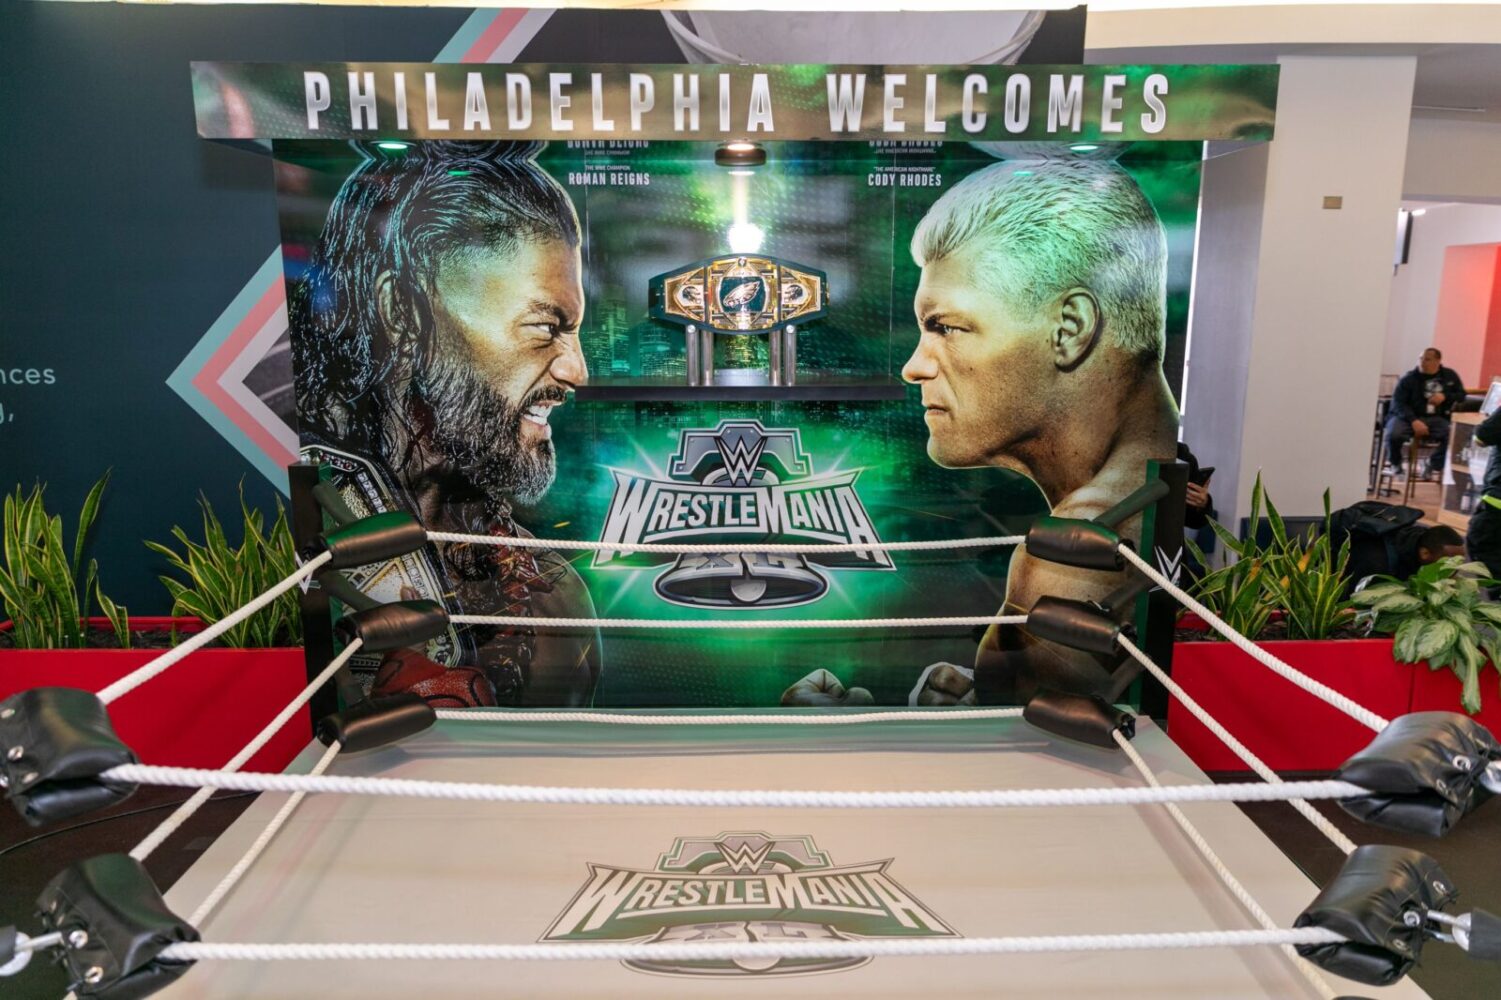 PHL Airport welcomes Wrestlemania